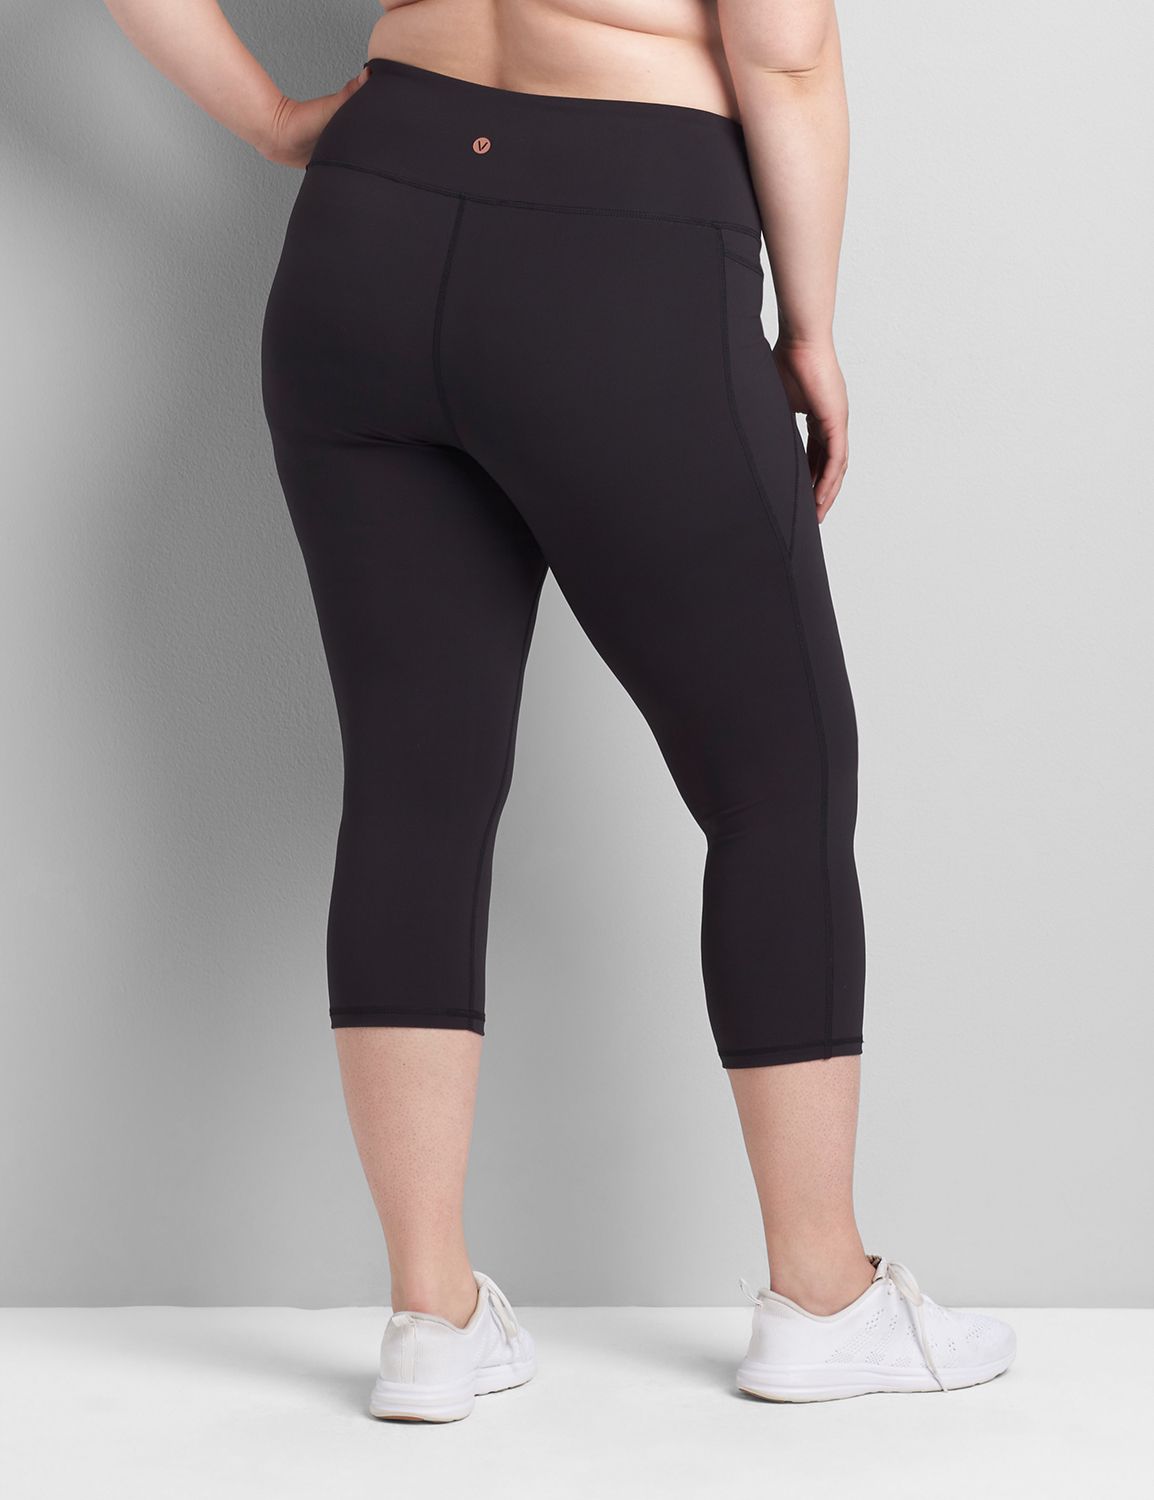 Women's Buttery Soft Activewear Capri Leggings with Pockets (Small only) -  Wholesale 